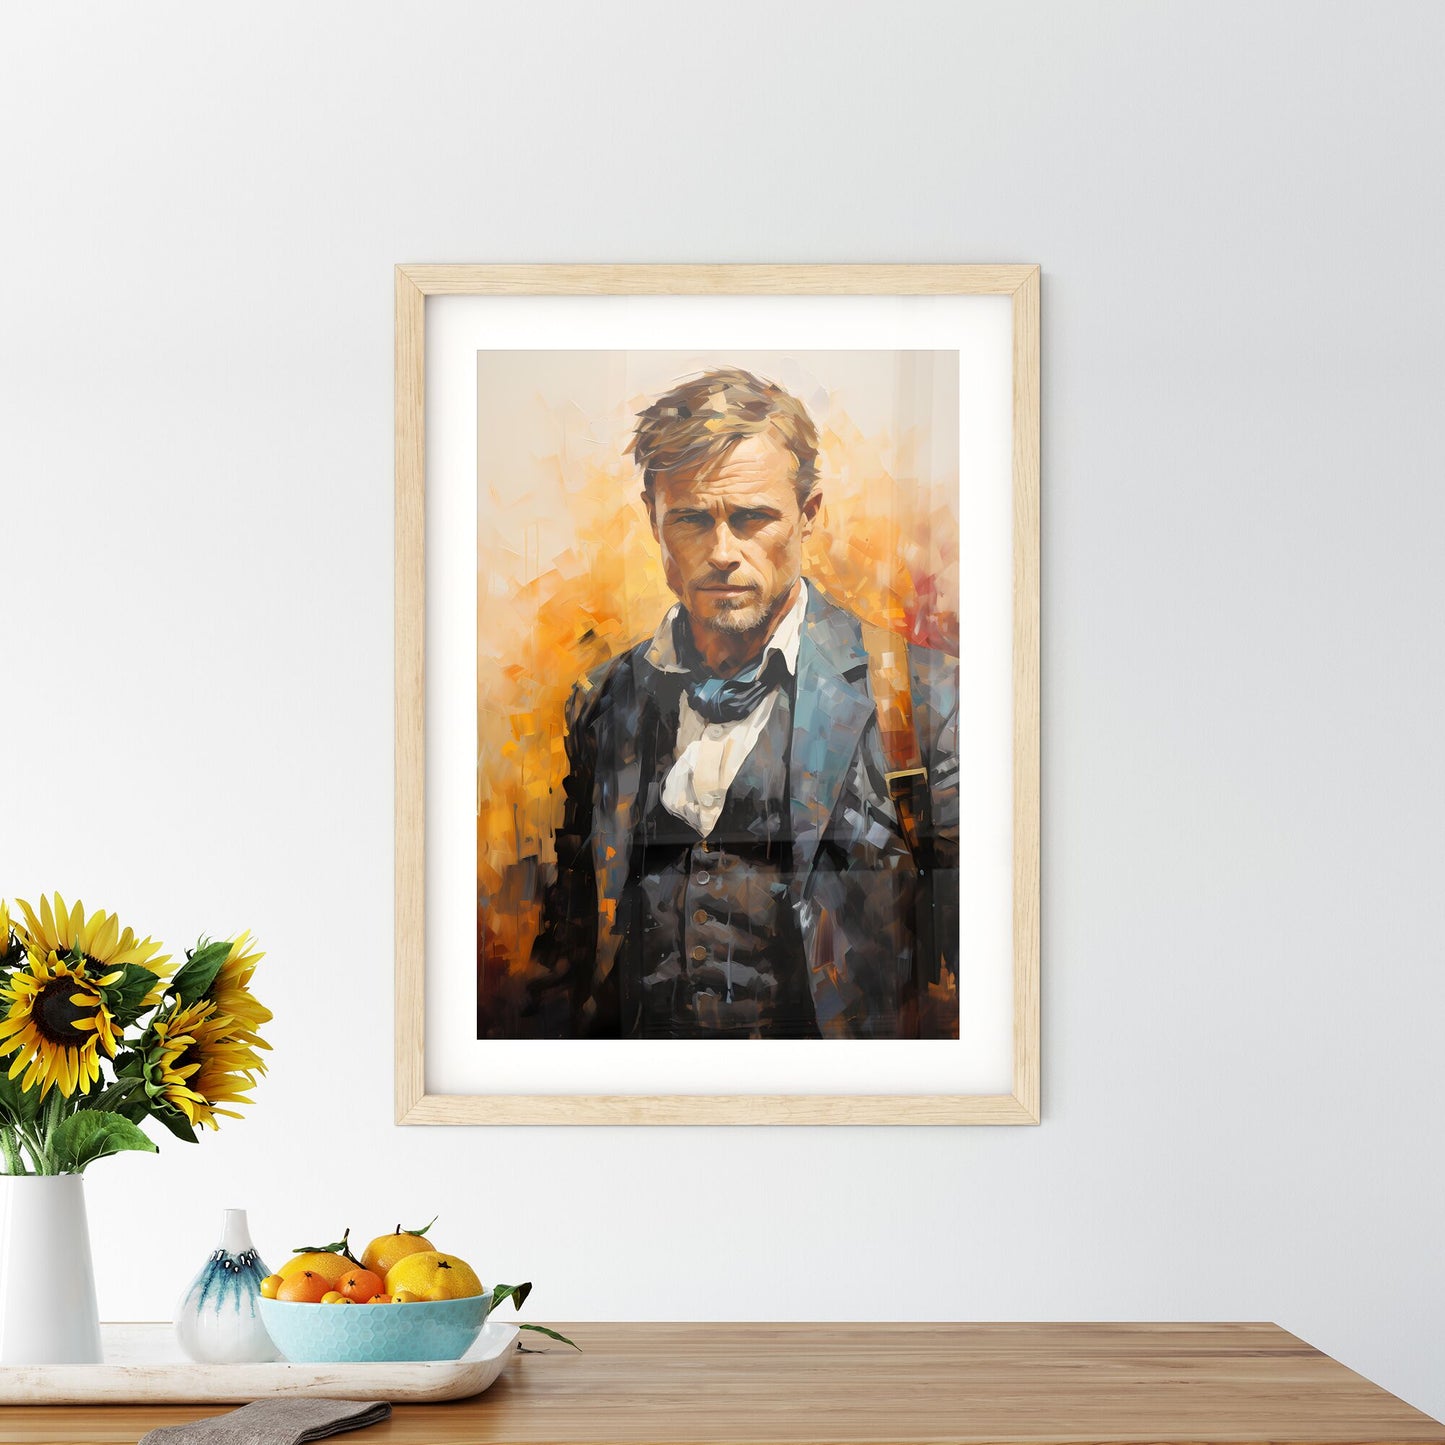 Butch Cassidy - A Painting Of A Man In A Suit Default Title